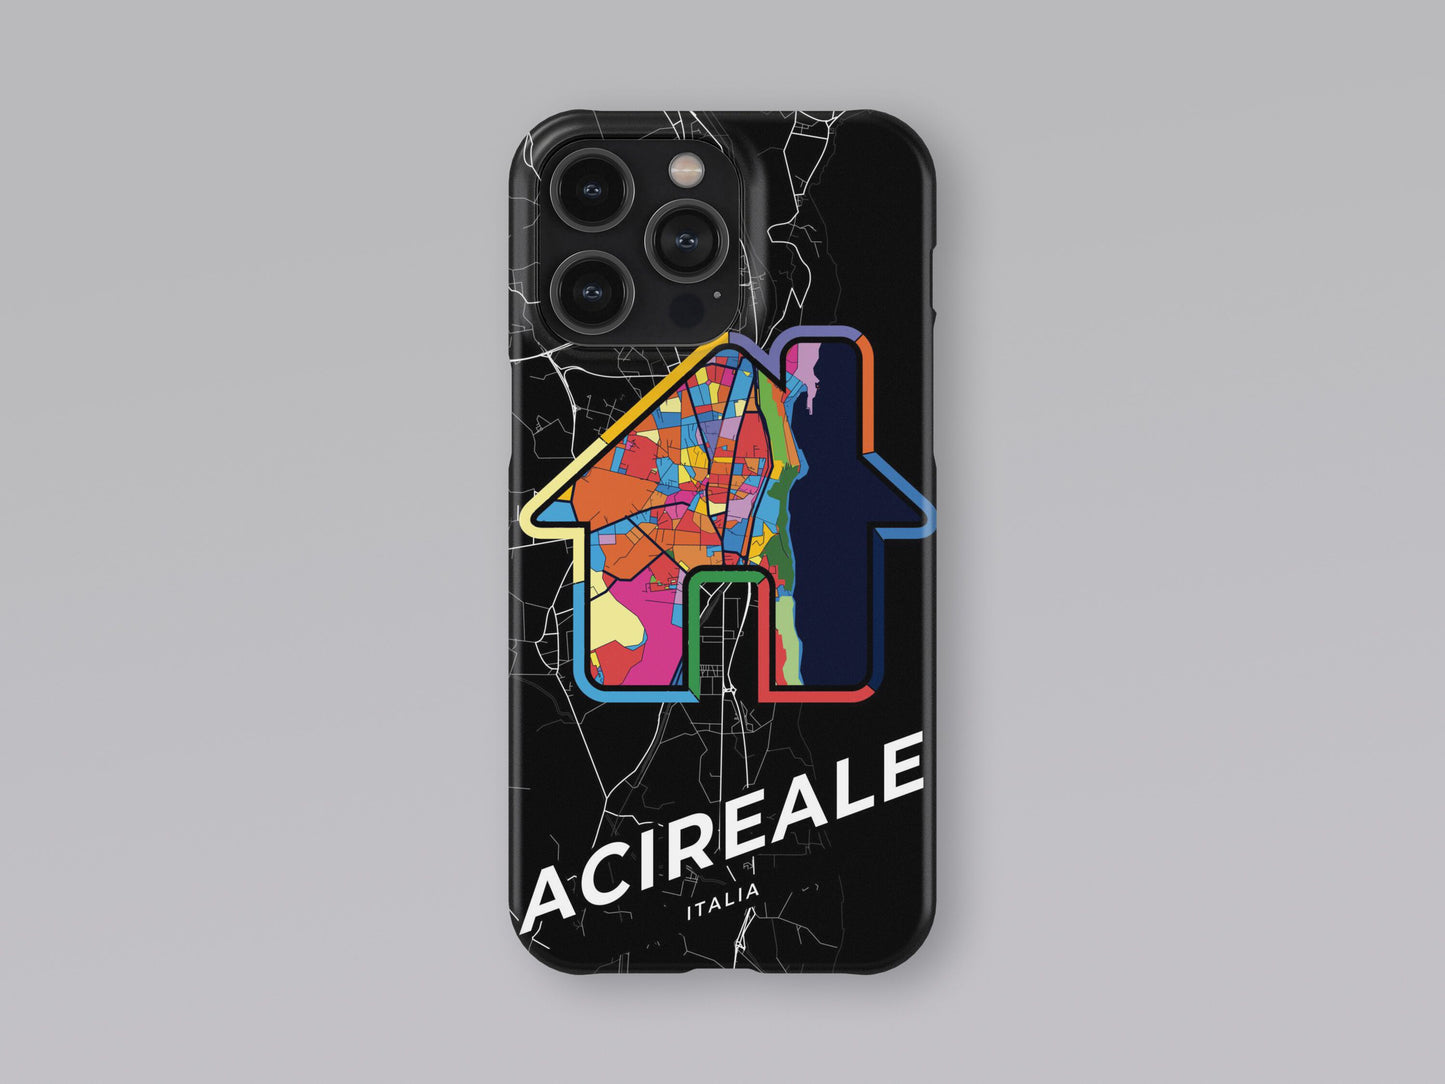 Acireale Italy slim phone case with colorful icon. Birthday, wedding or housewarming gift. Couple match cases. 3